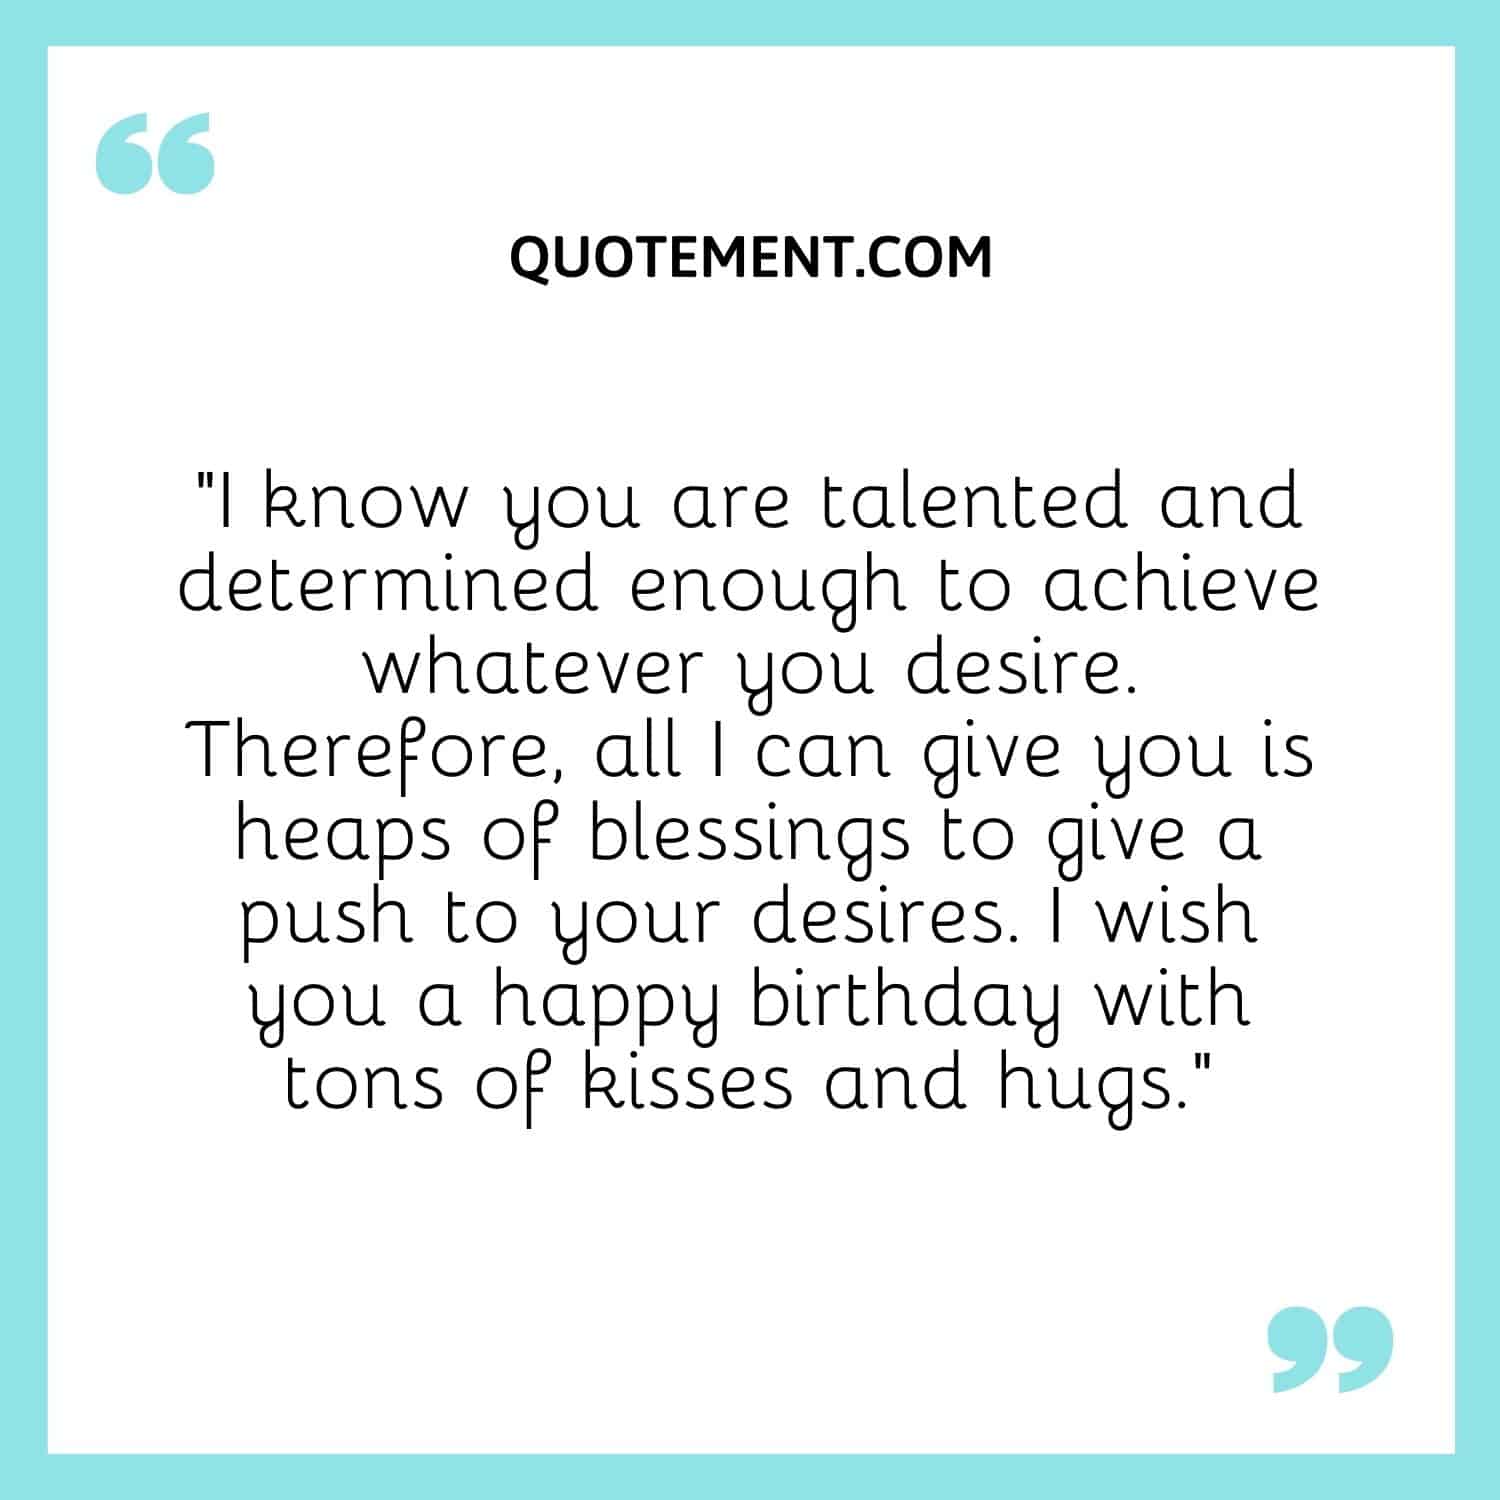 I know you are talented and determined enough to achieve whatever you desire.